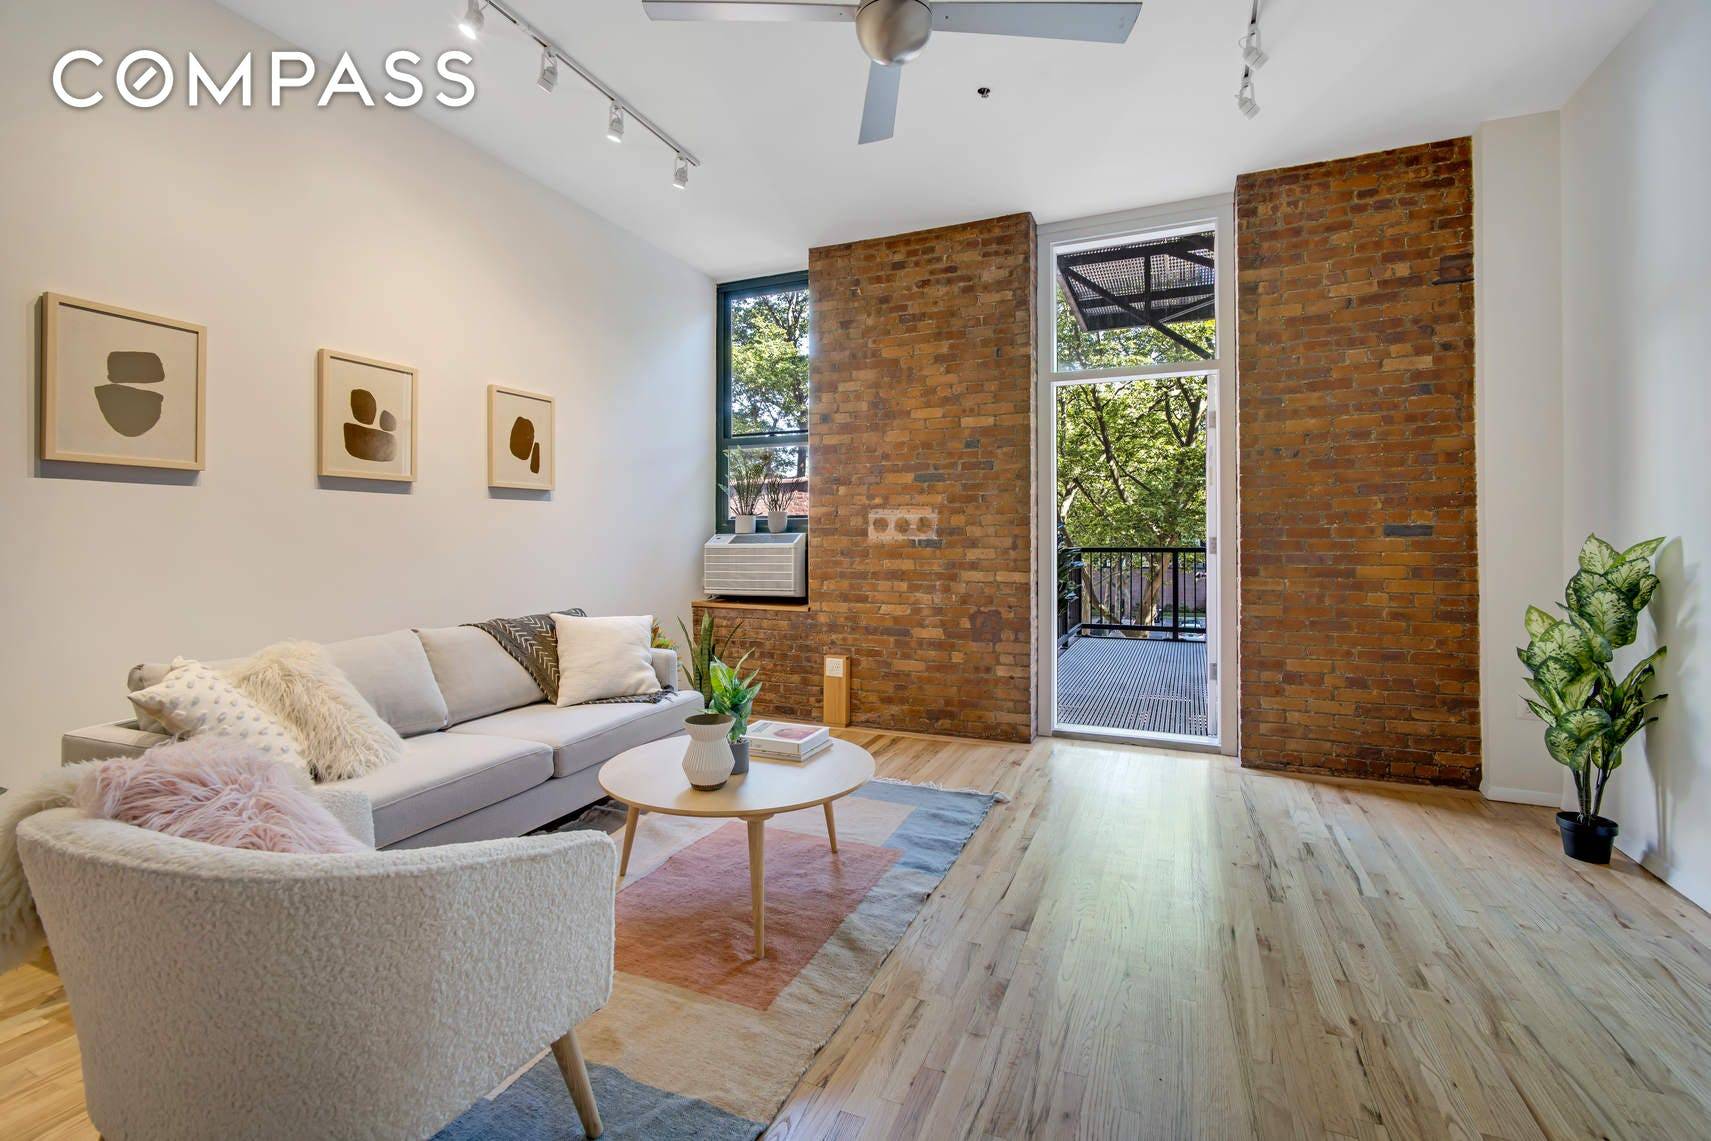 Located in the heart of Clinton Hill, apartment 3G at Clinton Mews is a beautifully renovated, extra large, South facing one bedroom with wraparound balcony.